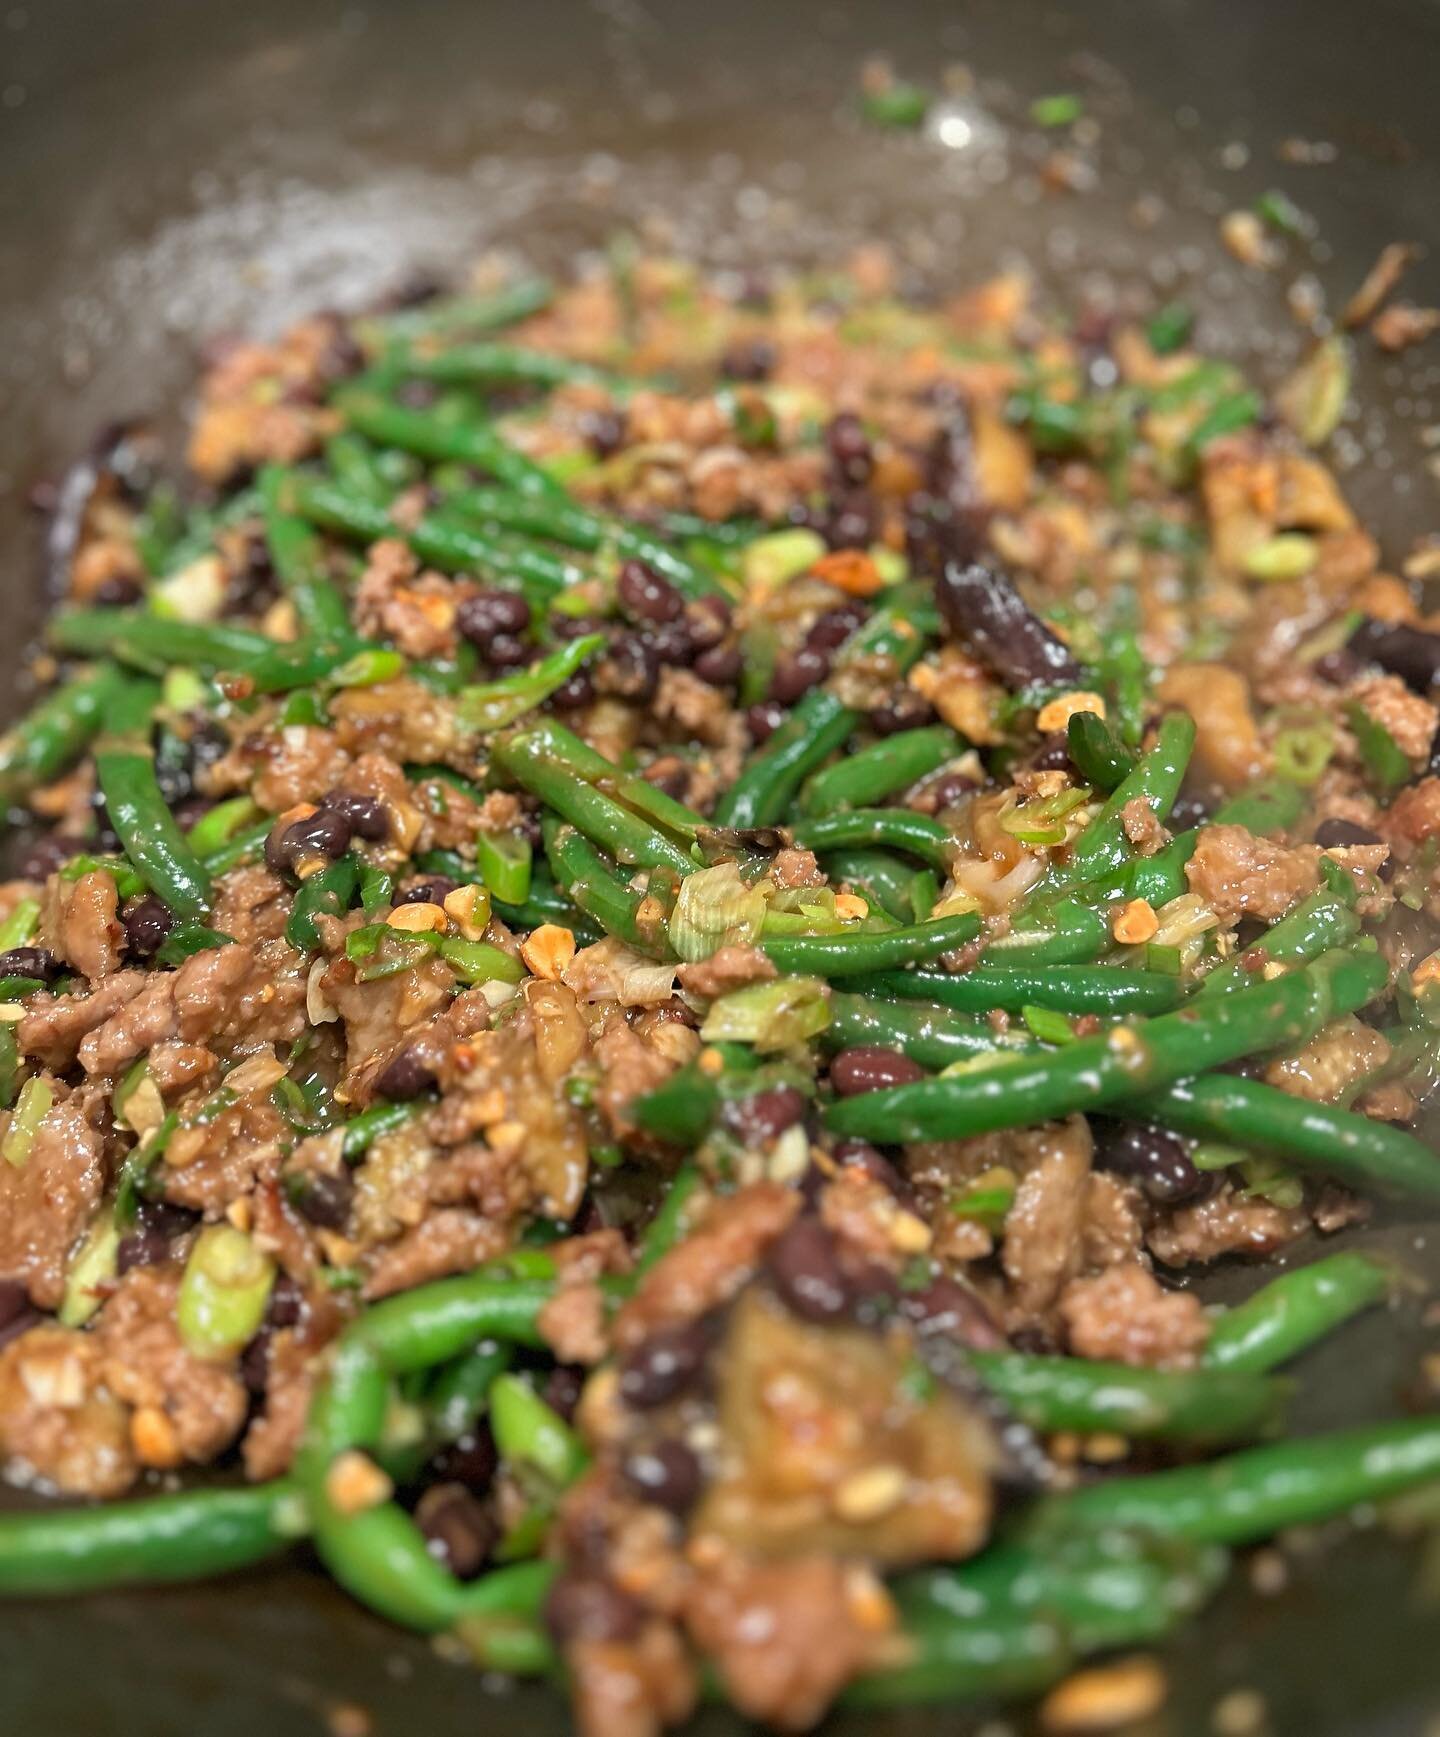 I made this Asian stir fry with eggplant, green beans, black beans, ground pork in a sesame, ginger, garlic and oyster sauce! The flavors of the dish were amazing and was enjoyed by all the guests!!
Contact me at www.elderberryprovisions.com or send 